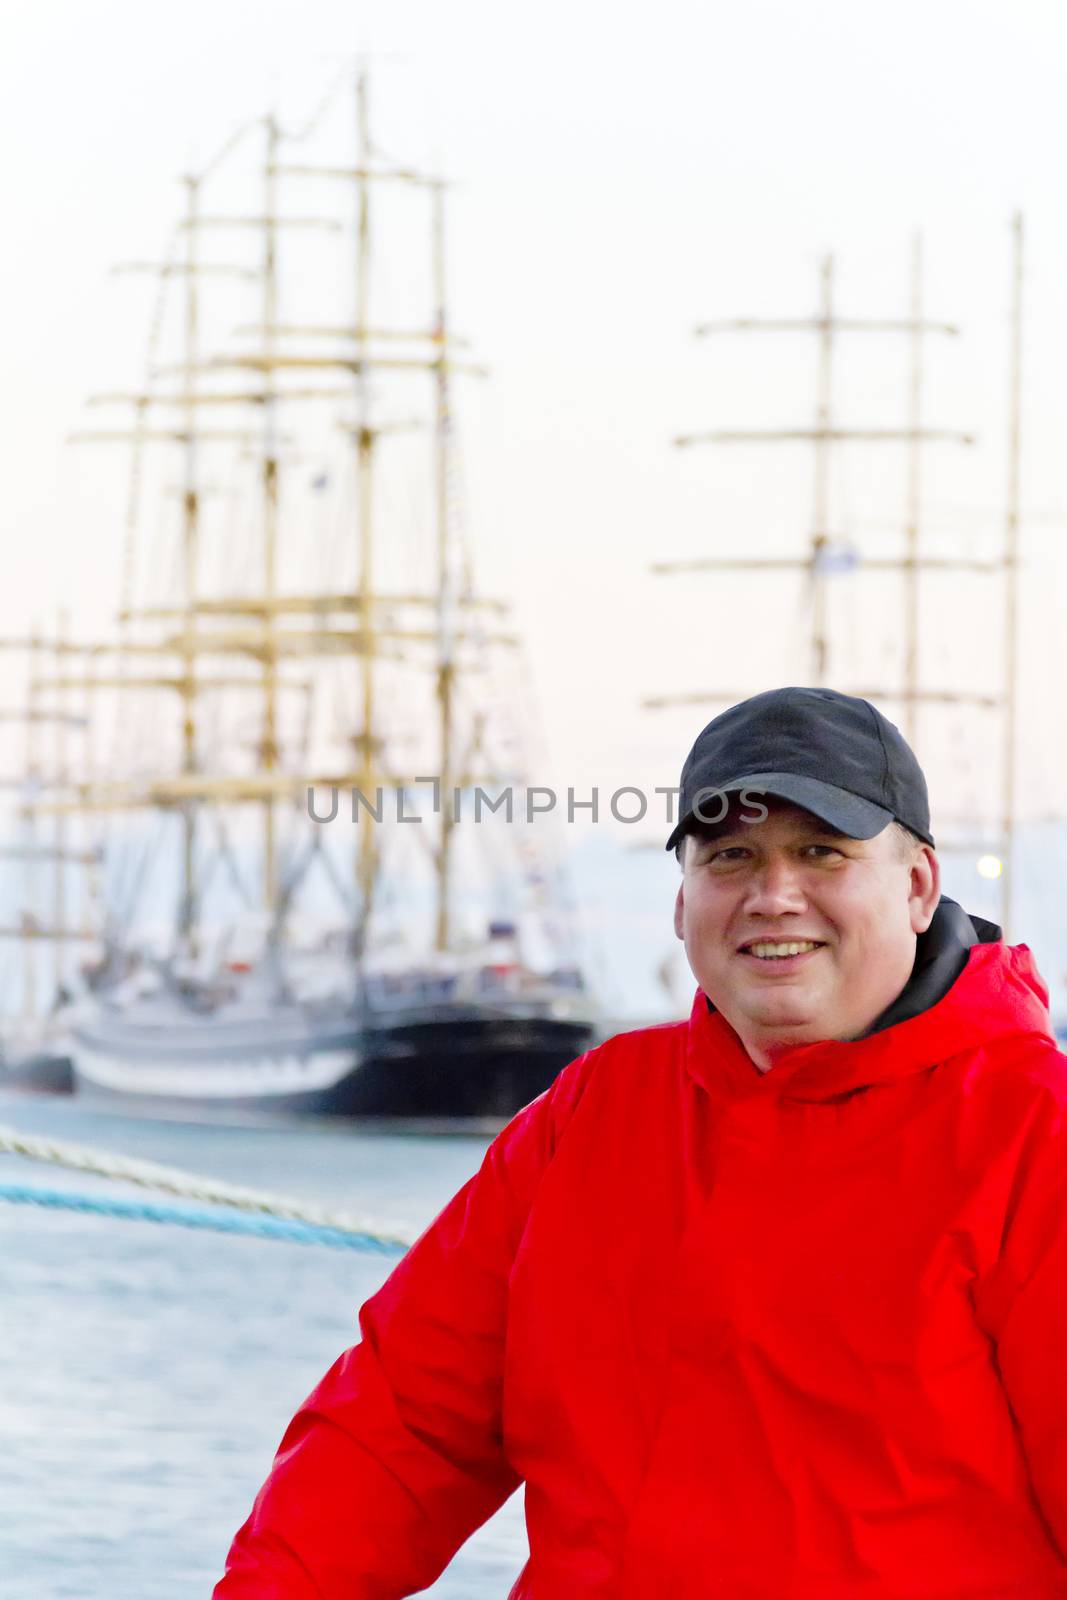 Big fat man in red jacket on ship background